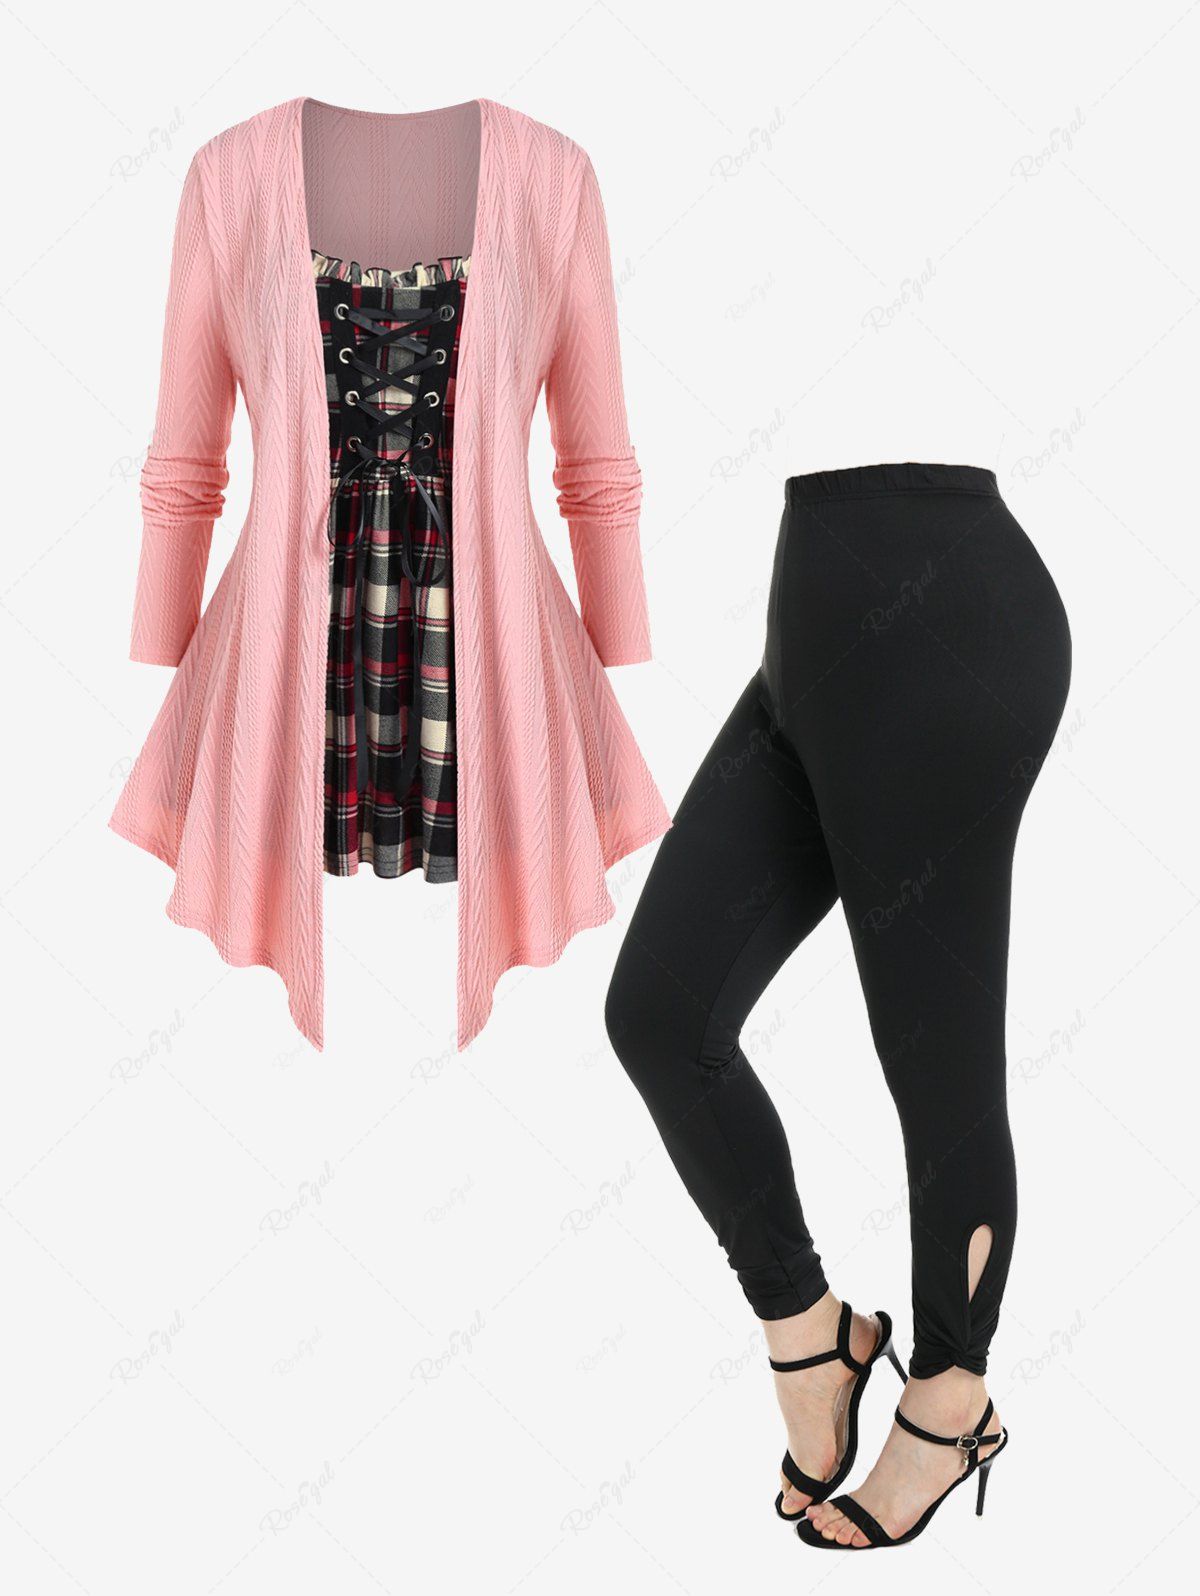 Buy Frilled Plaid Lace-up Textured Knit Twofer Top and Twist Skinny Leggings Plus Size Outfit  